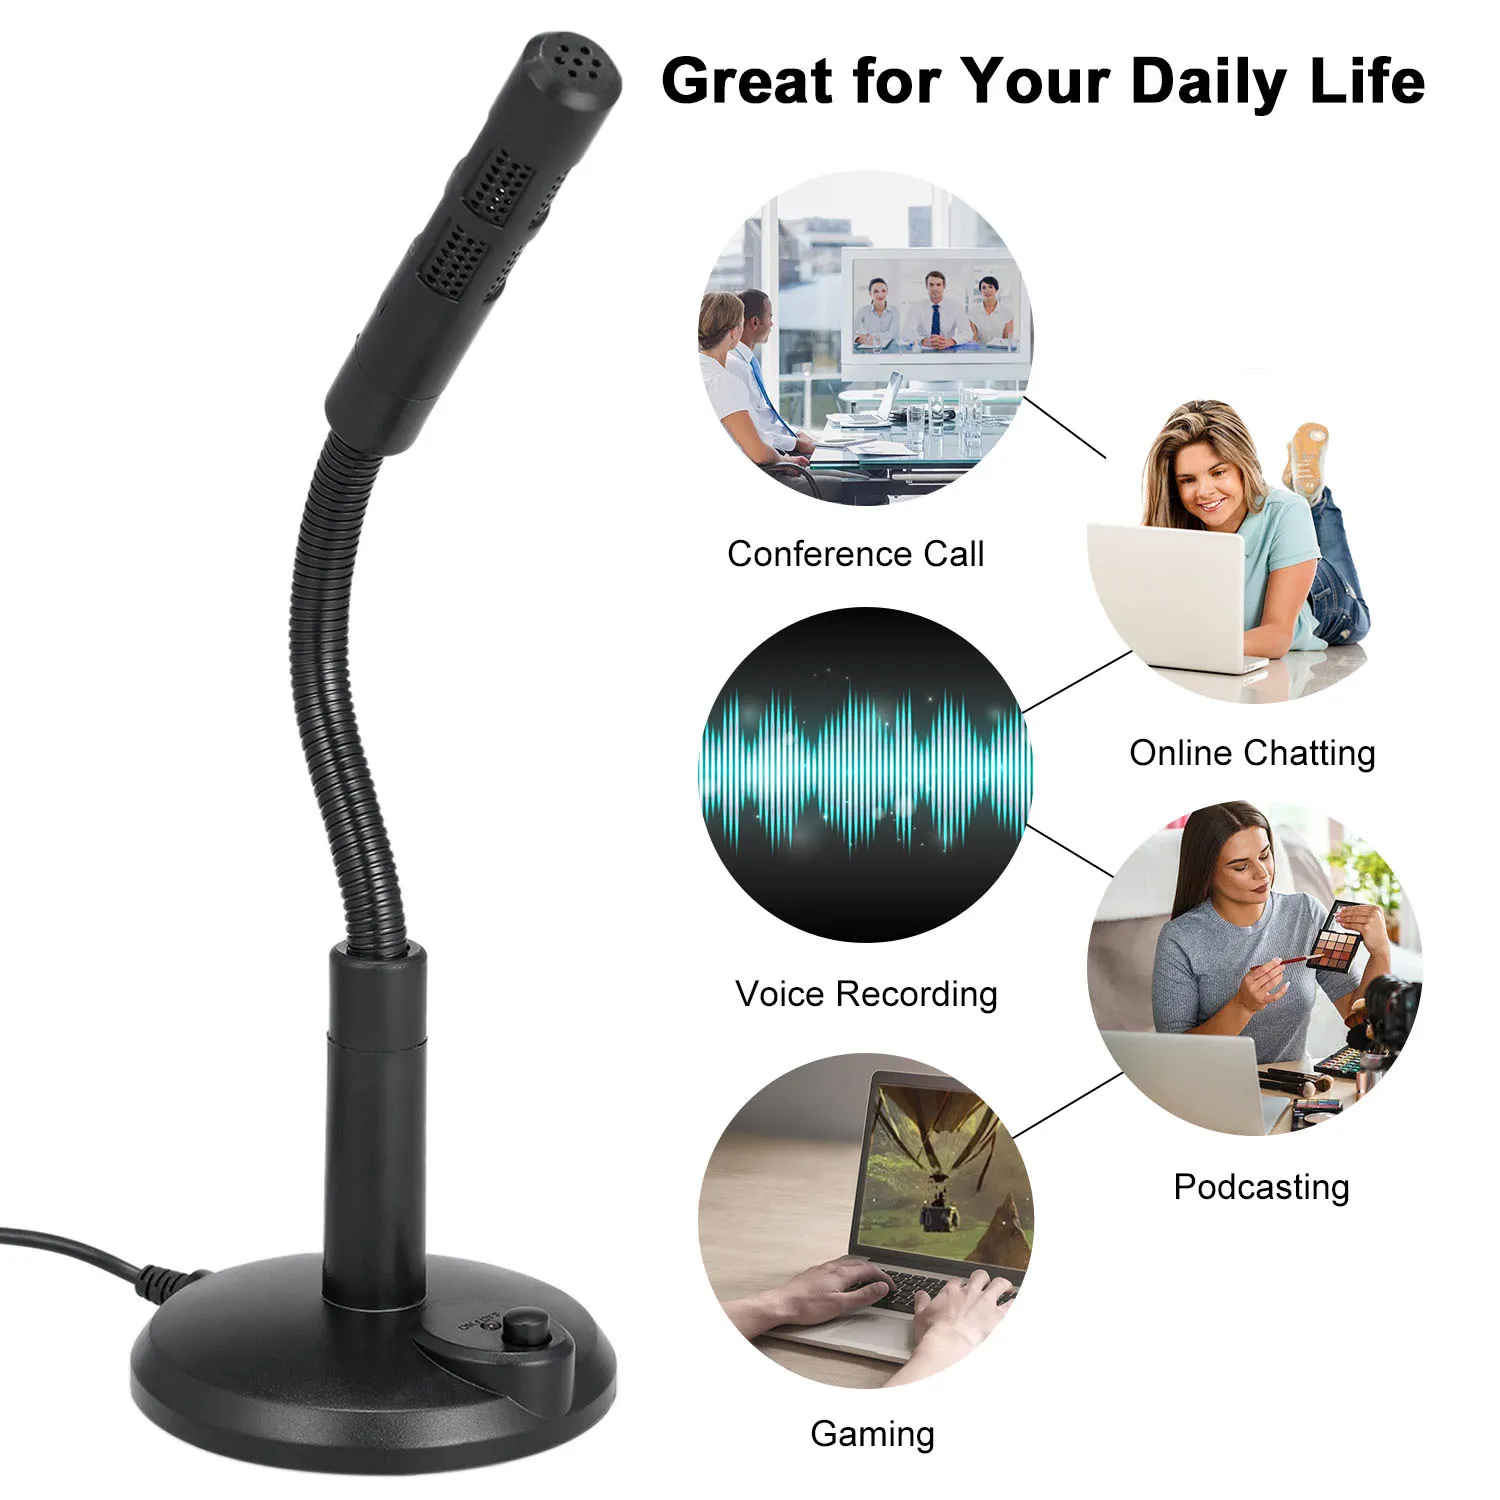 360° Adjustable USB Desktop Microphone Plug & Play Omnidirectional PC Laptop Computer Mic Conference Call Voice Recording